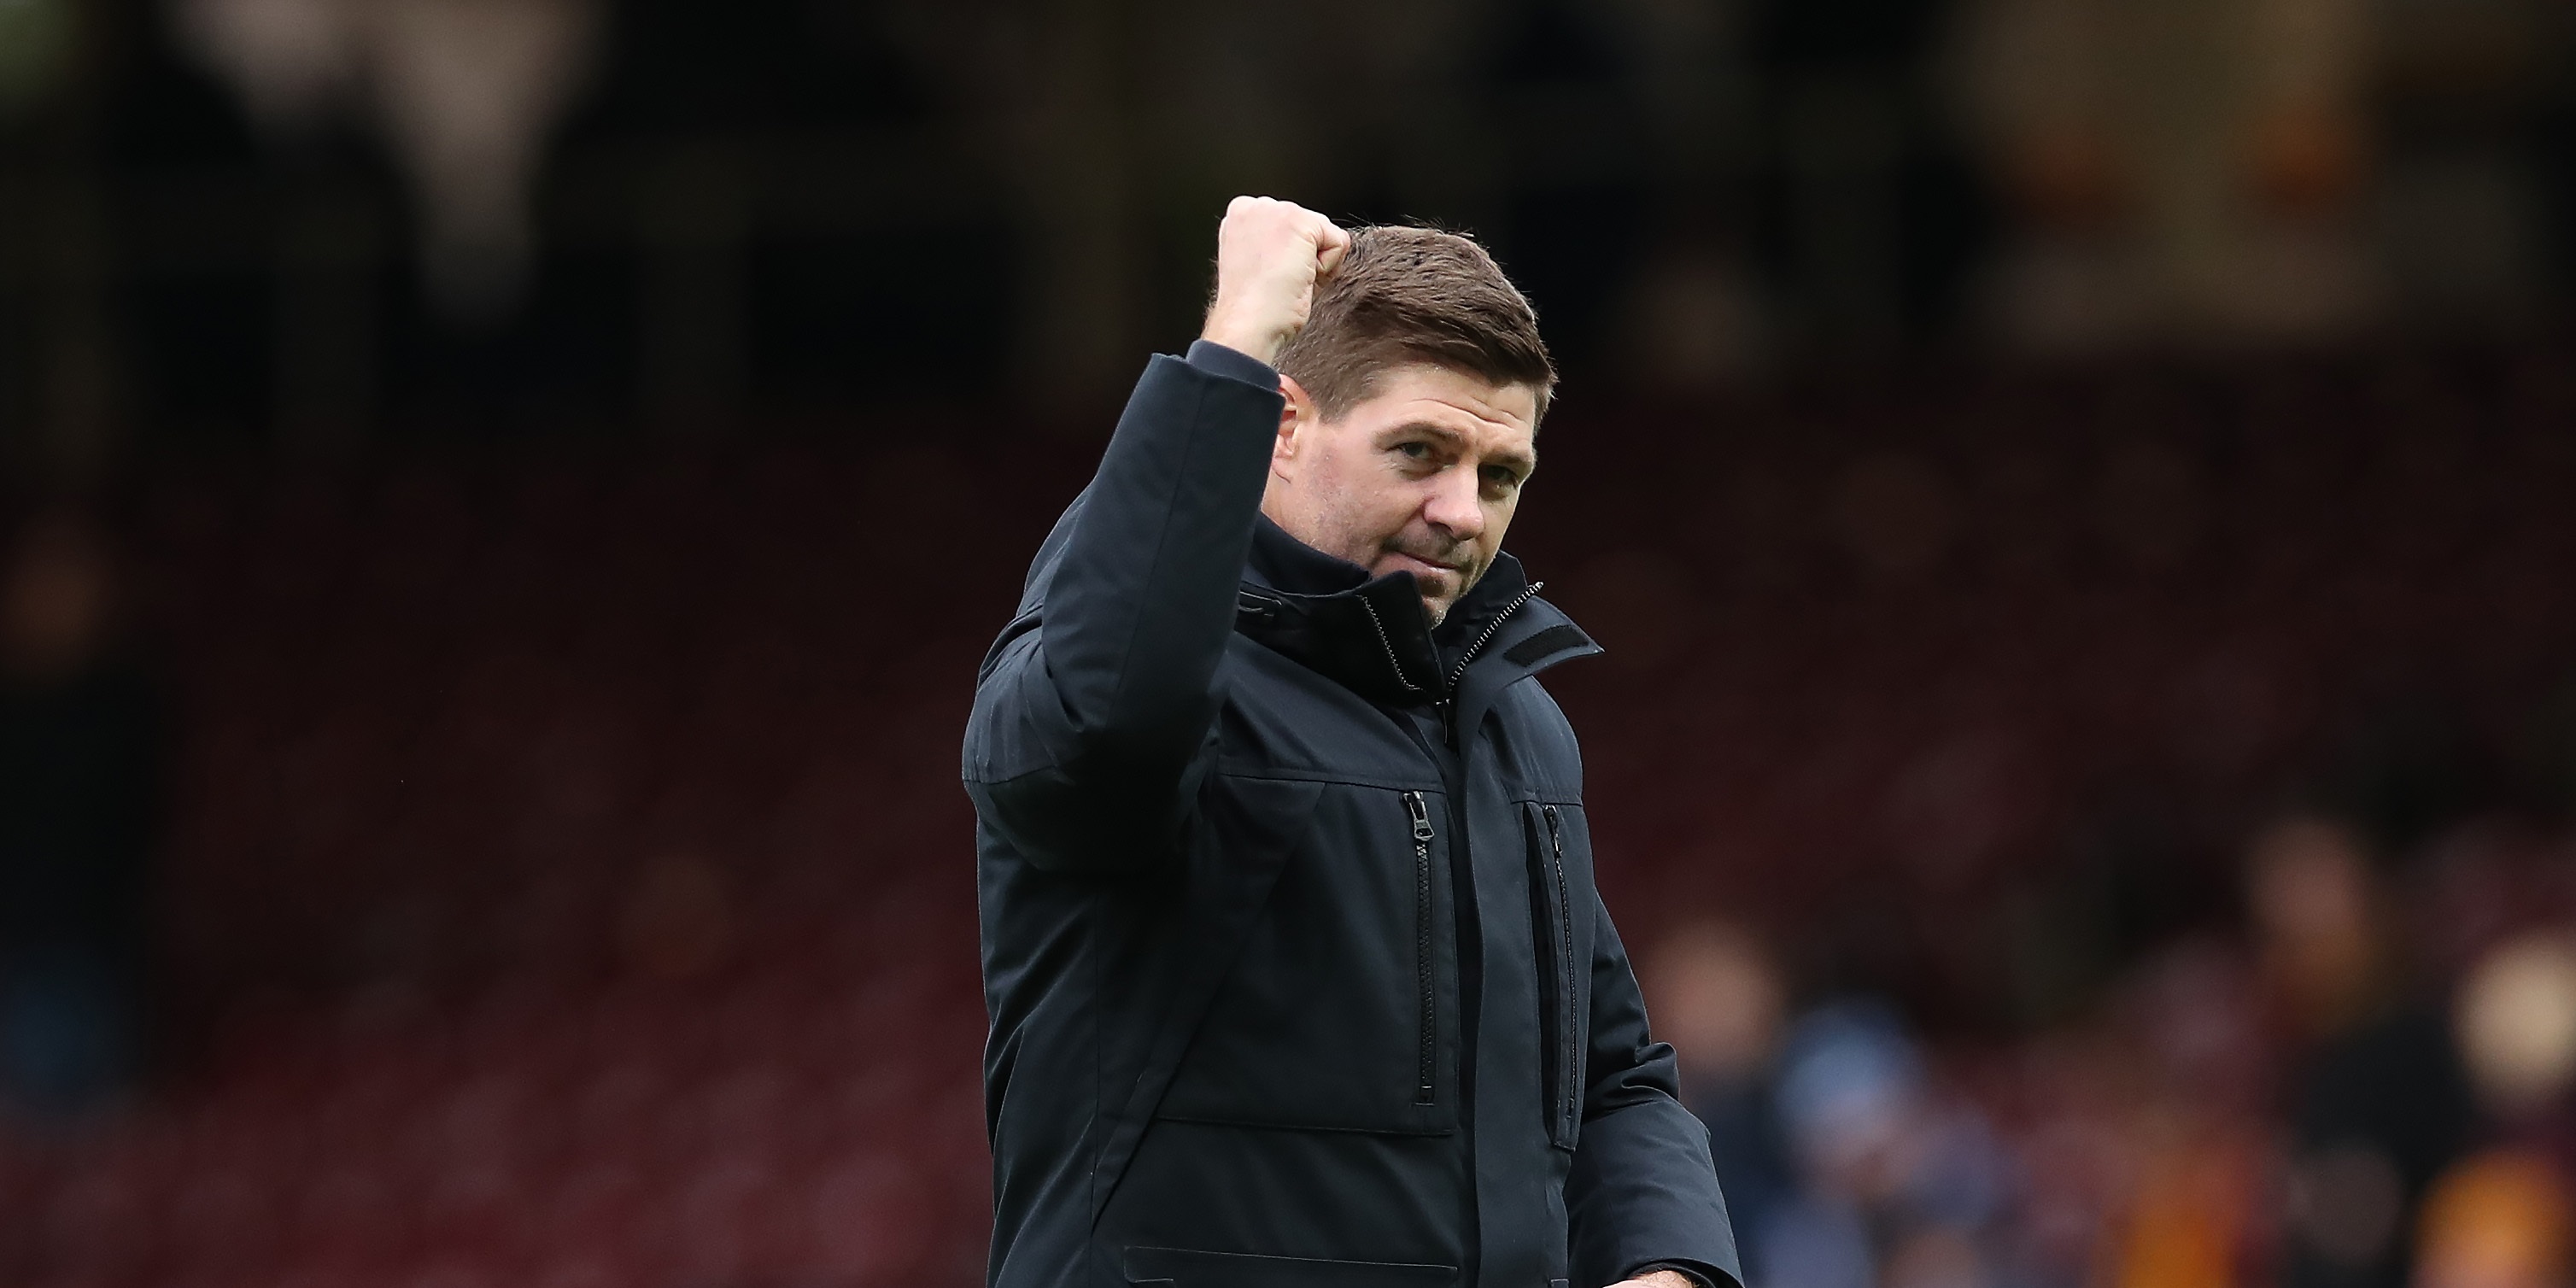 Gerrard’s actual Aston Villa contract details may worry some Liverpool fans